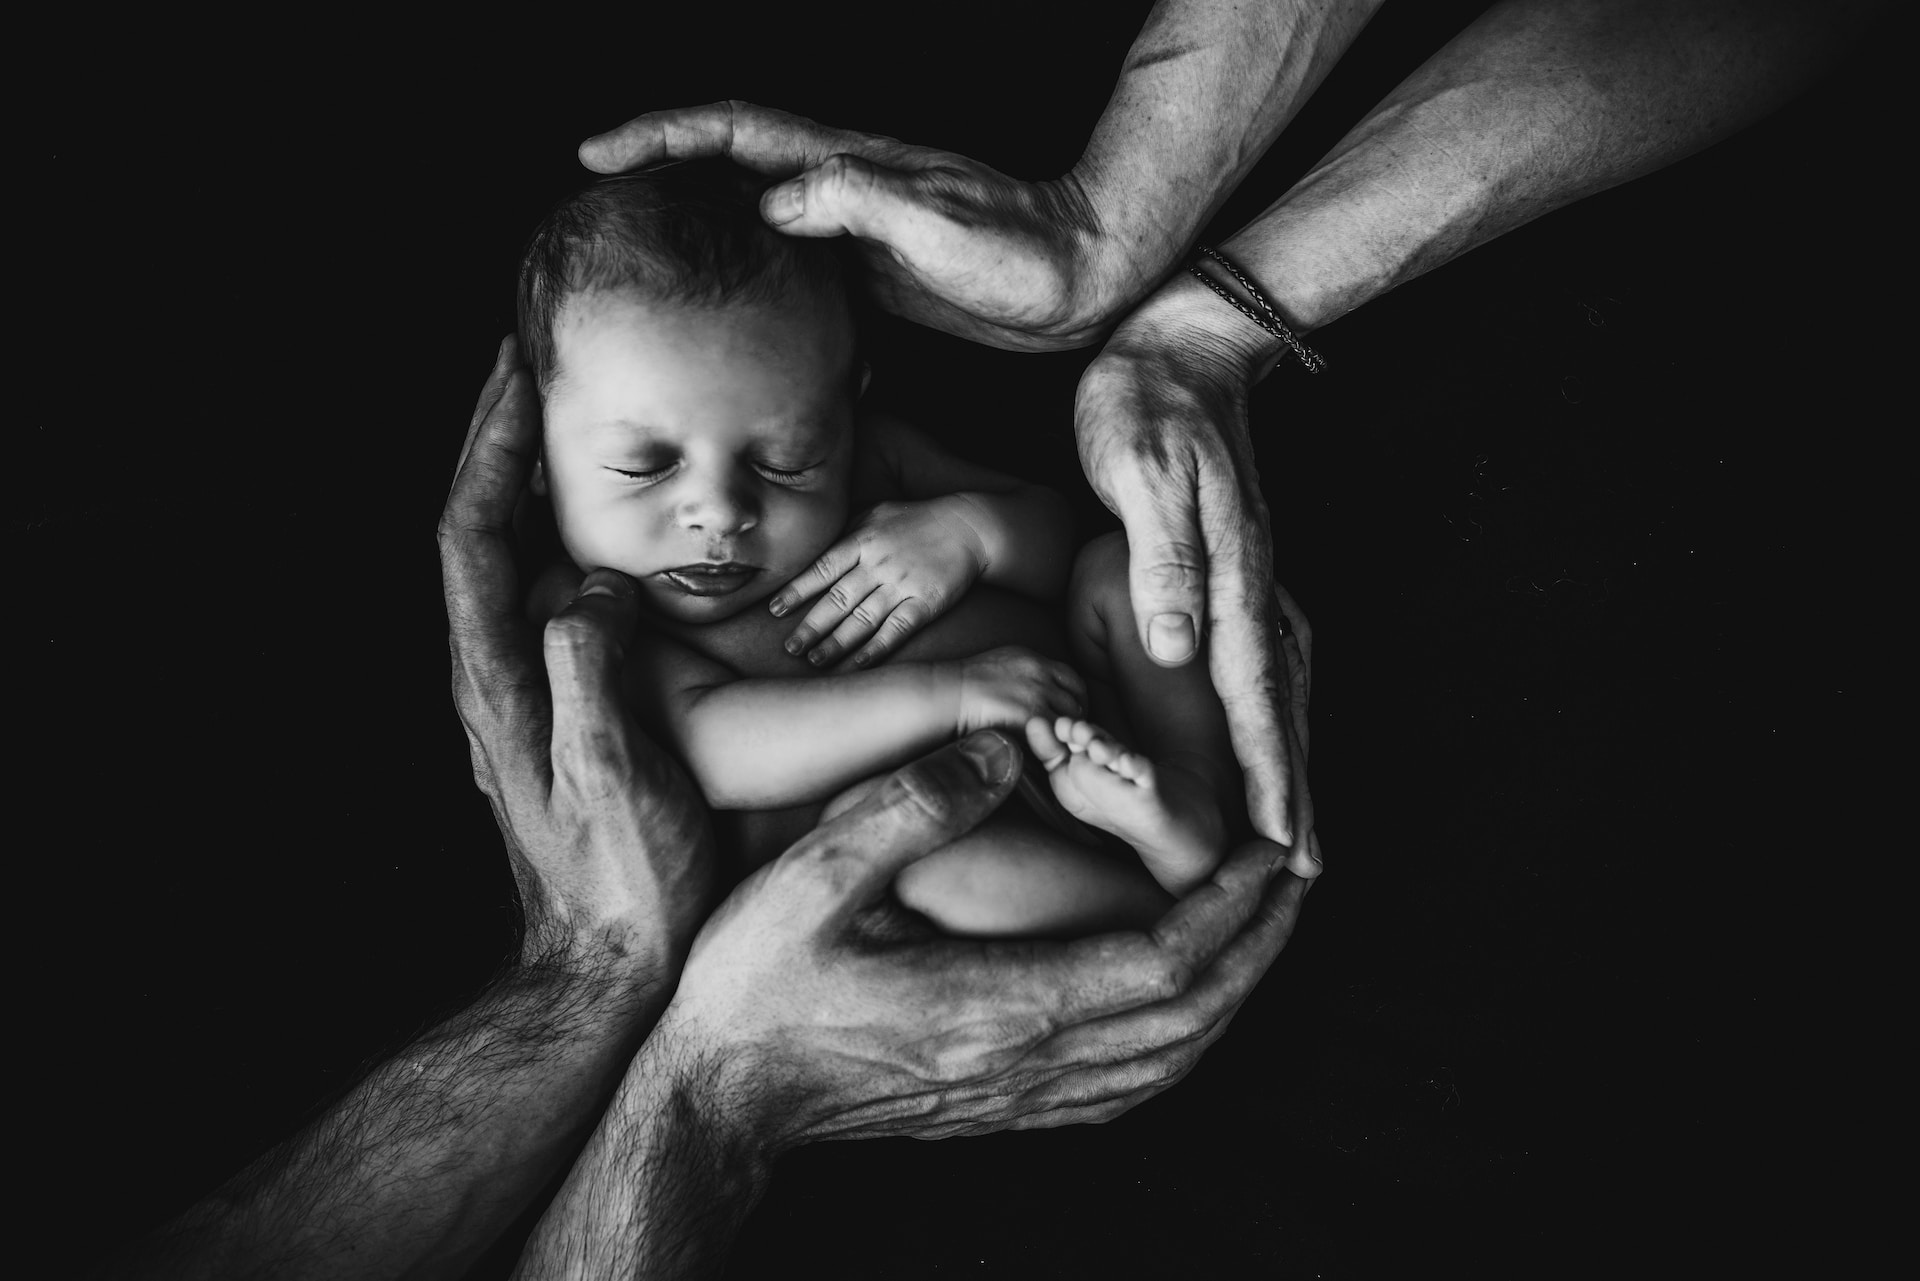 Photo shows a newborn baby surrounded by the hands of mother and father.